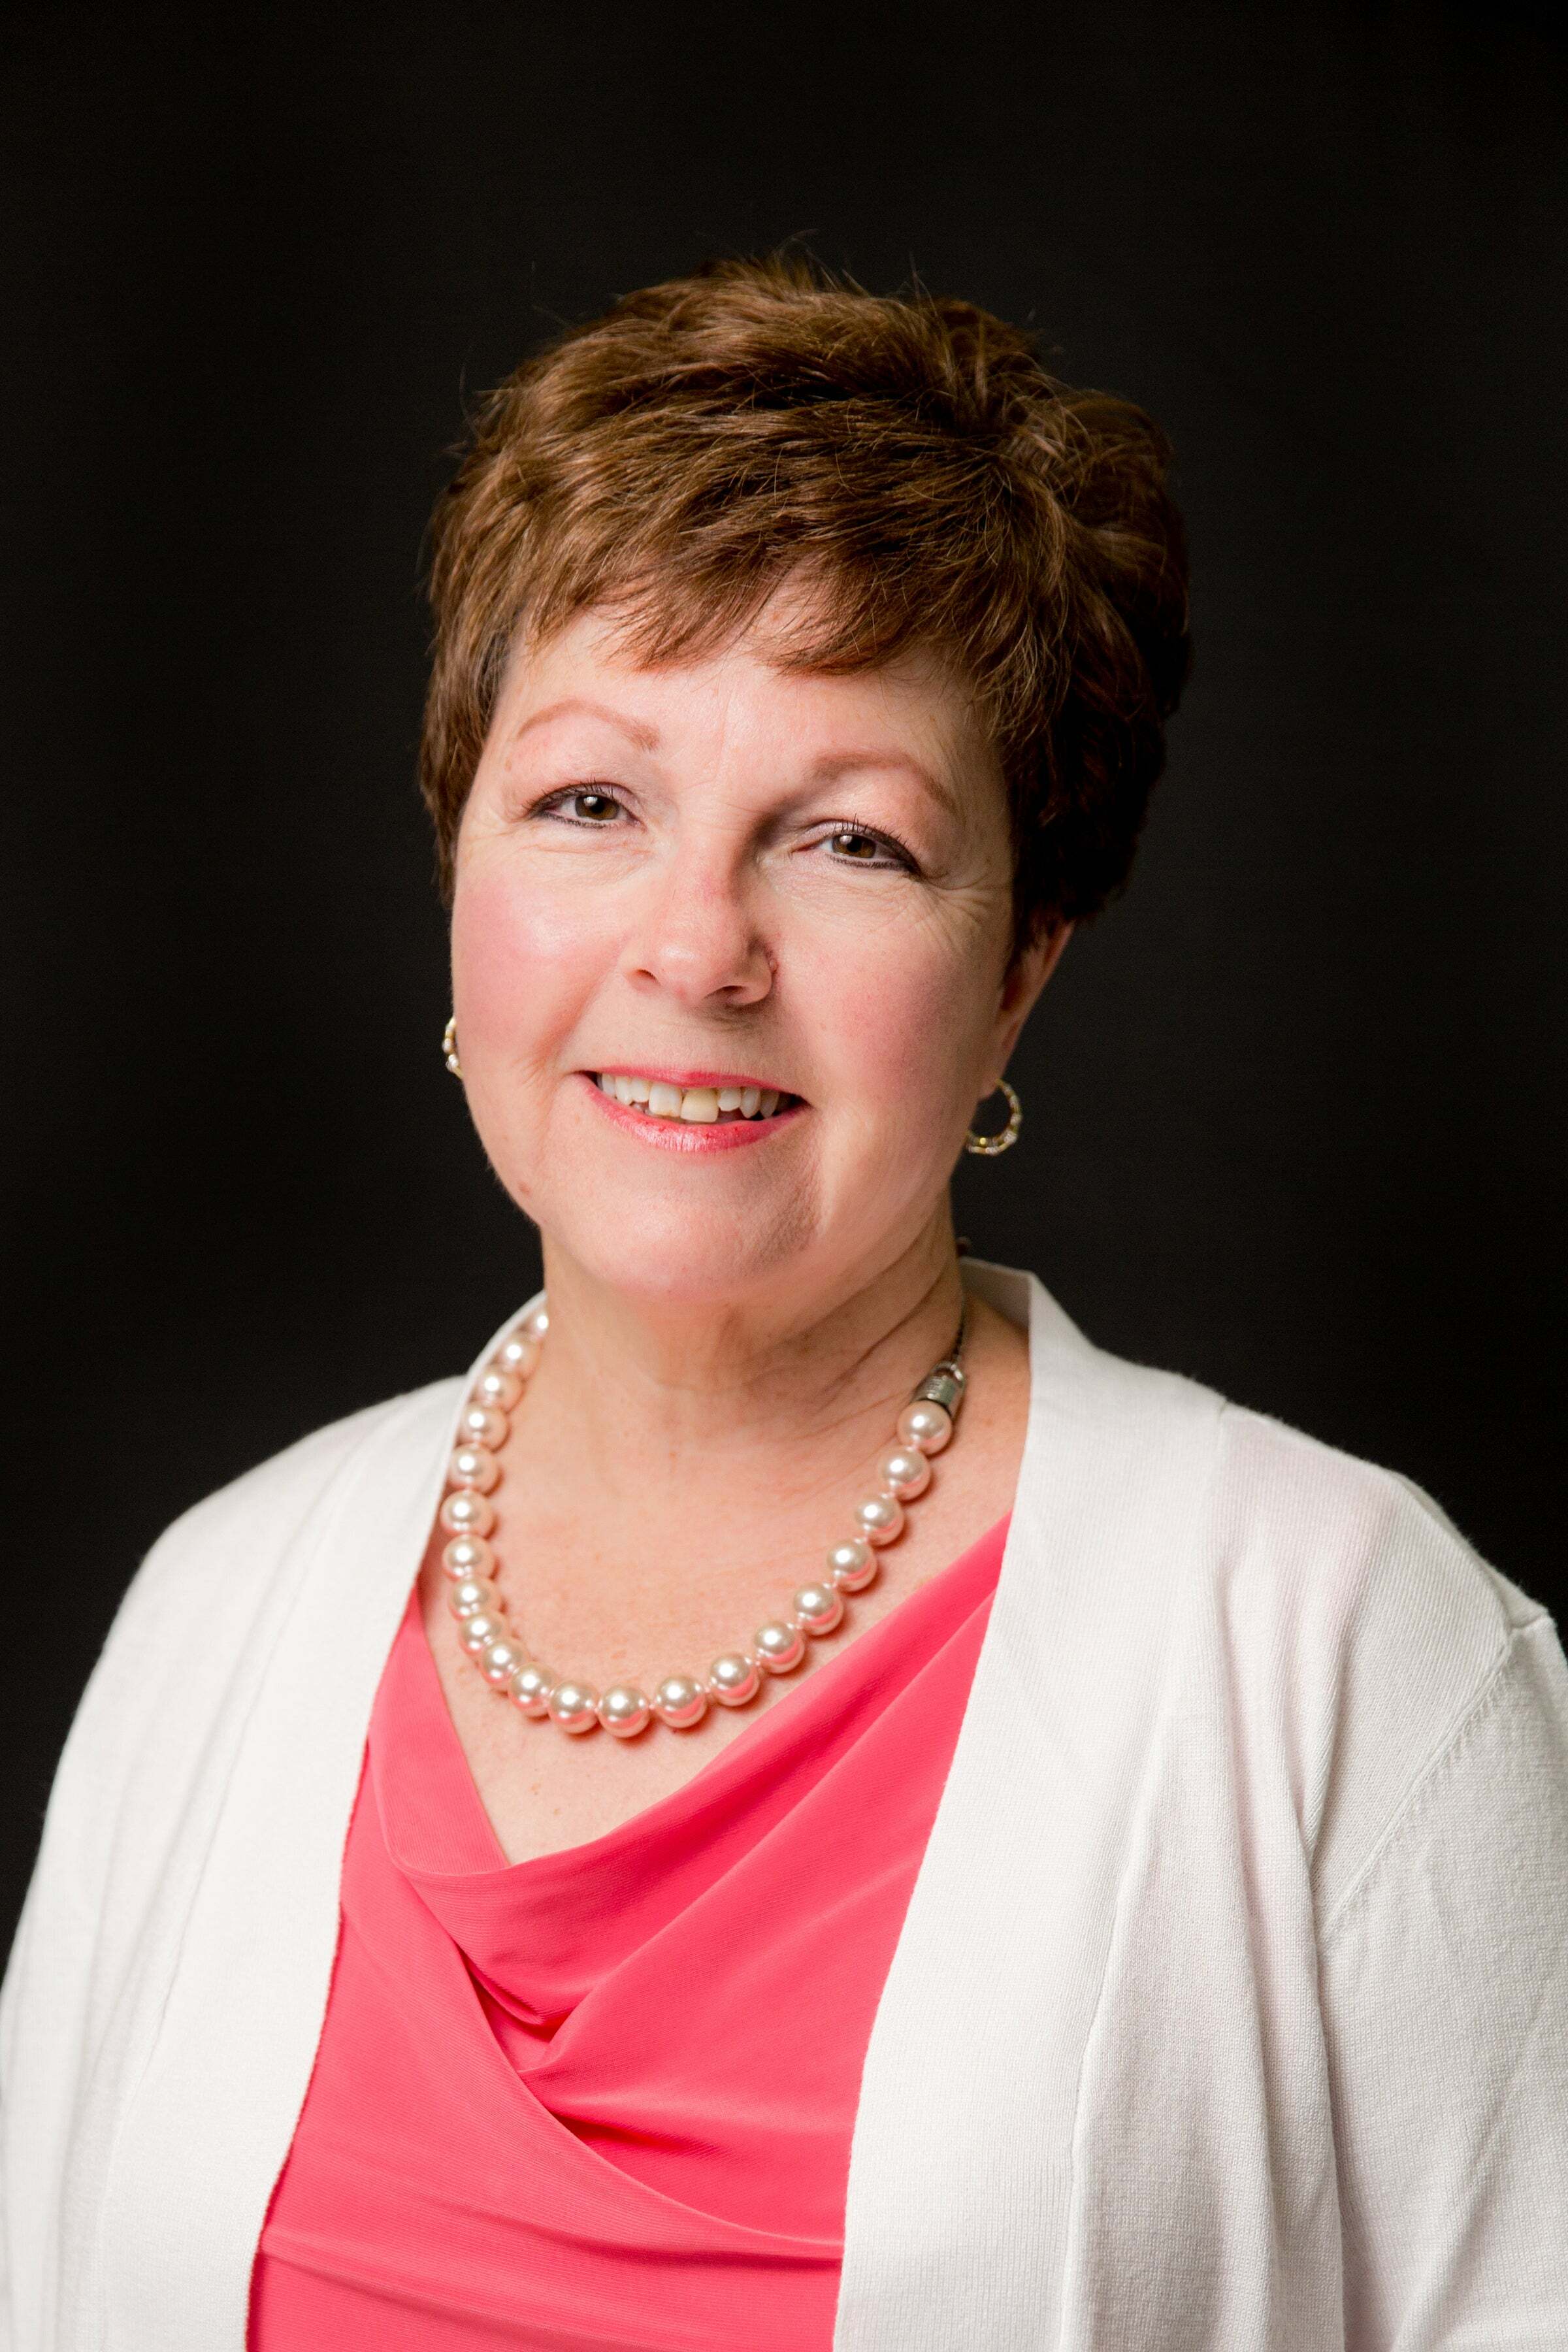 Raynell Ingold, Real Estate Salesperson in Lake Charles, Ingle Safari Realty